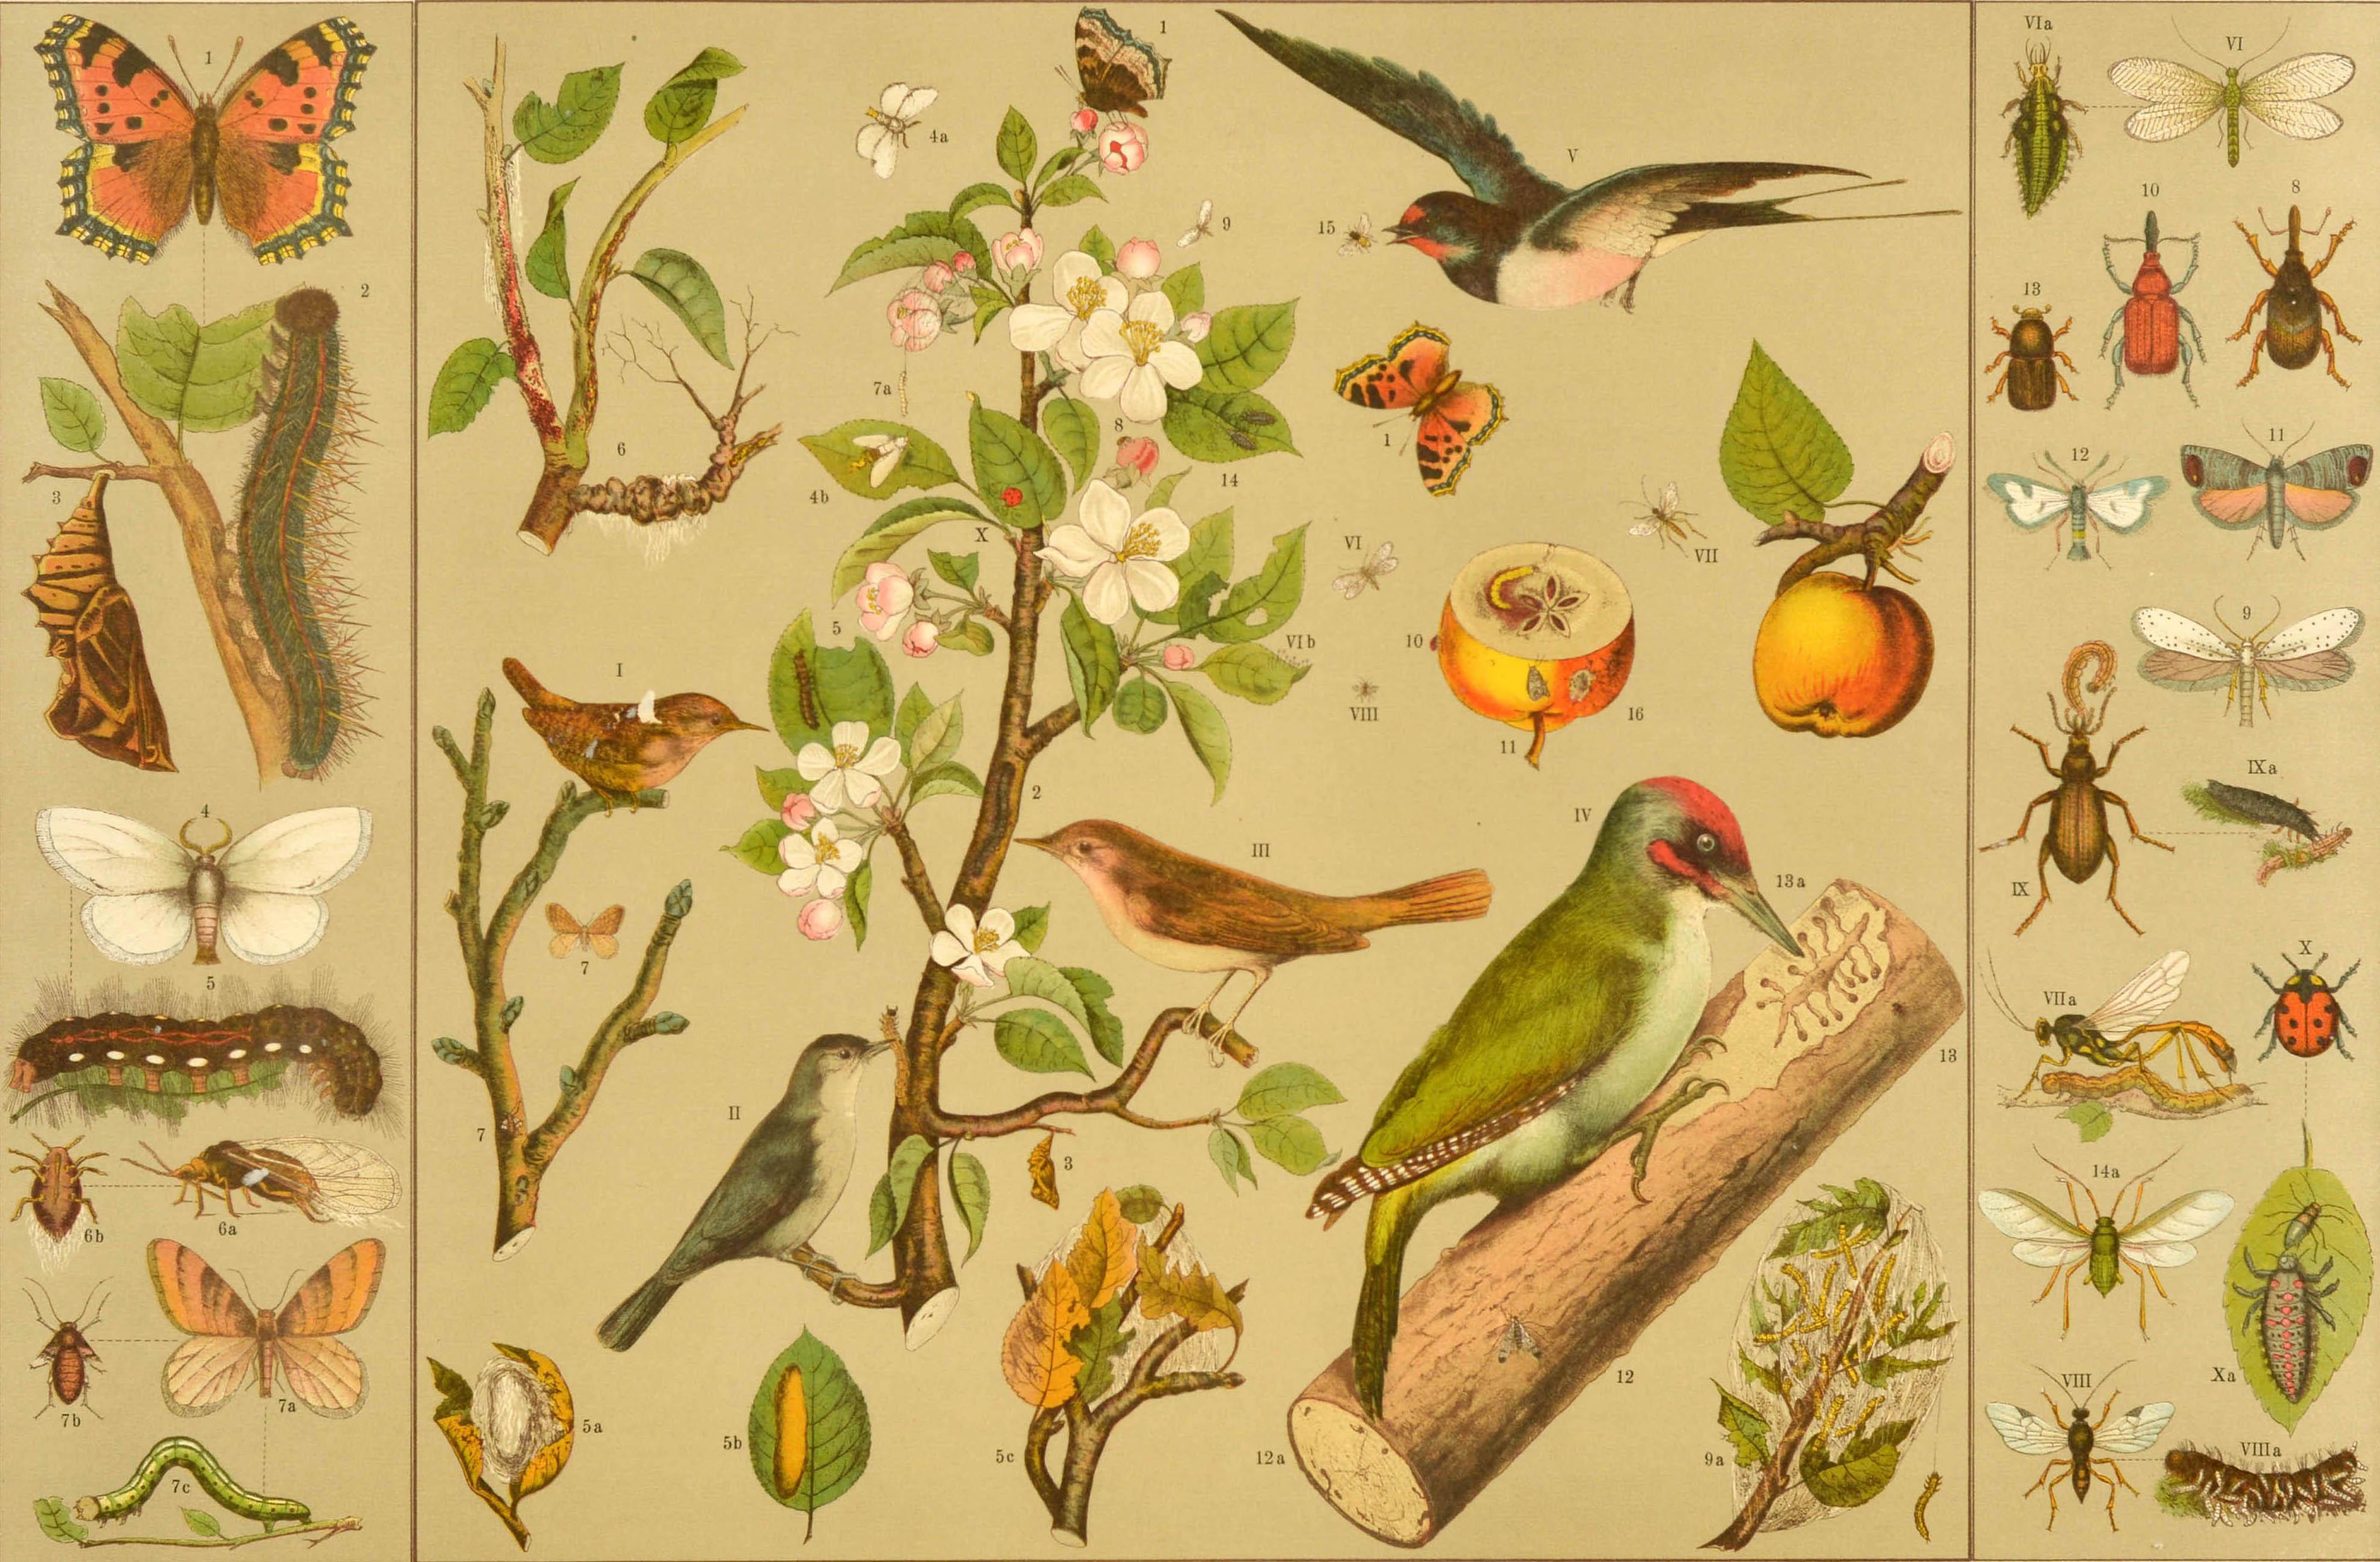 Original antique educational poster - Our cultivated plants, their friends and enemies - featuring numbered illustrations of an apple tree (Pyrus malus L.) with flowers and leaves, surrounded by the fruit and branches, different birds and insects